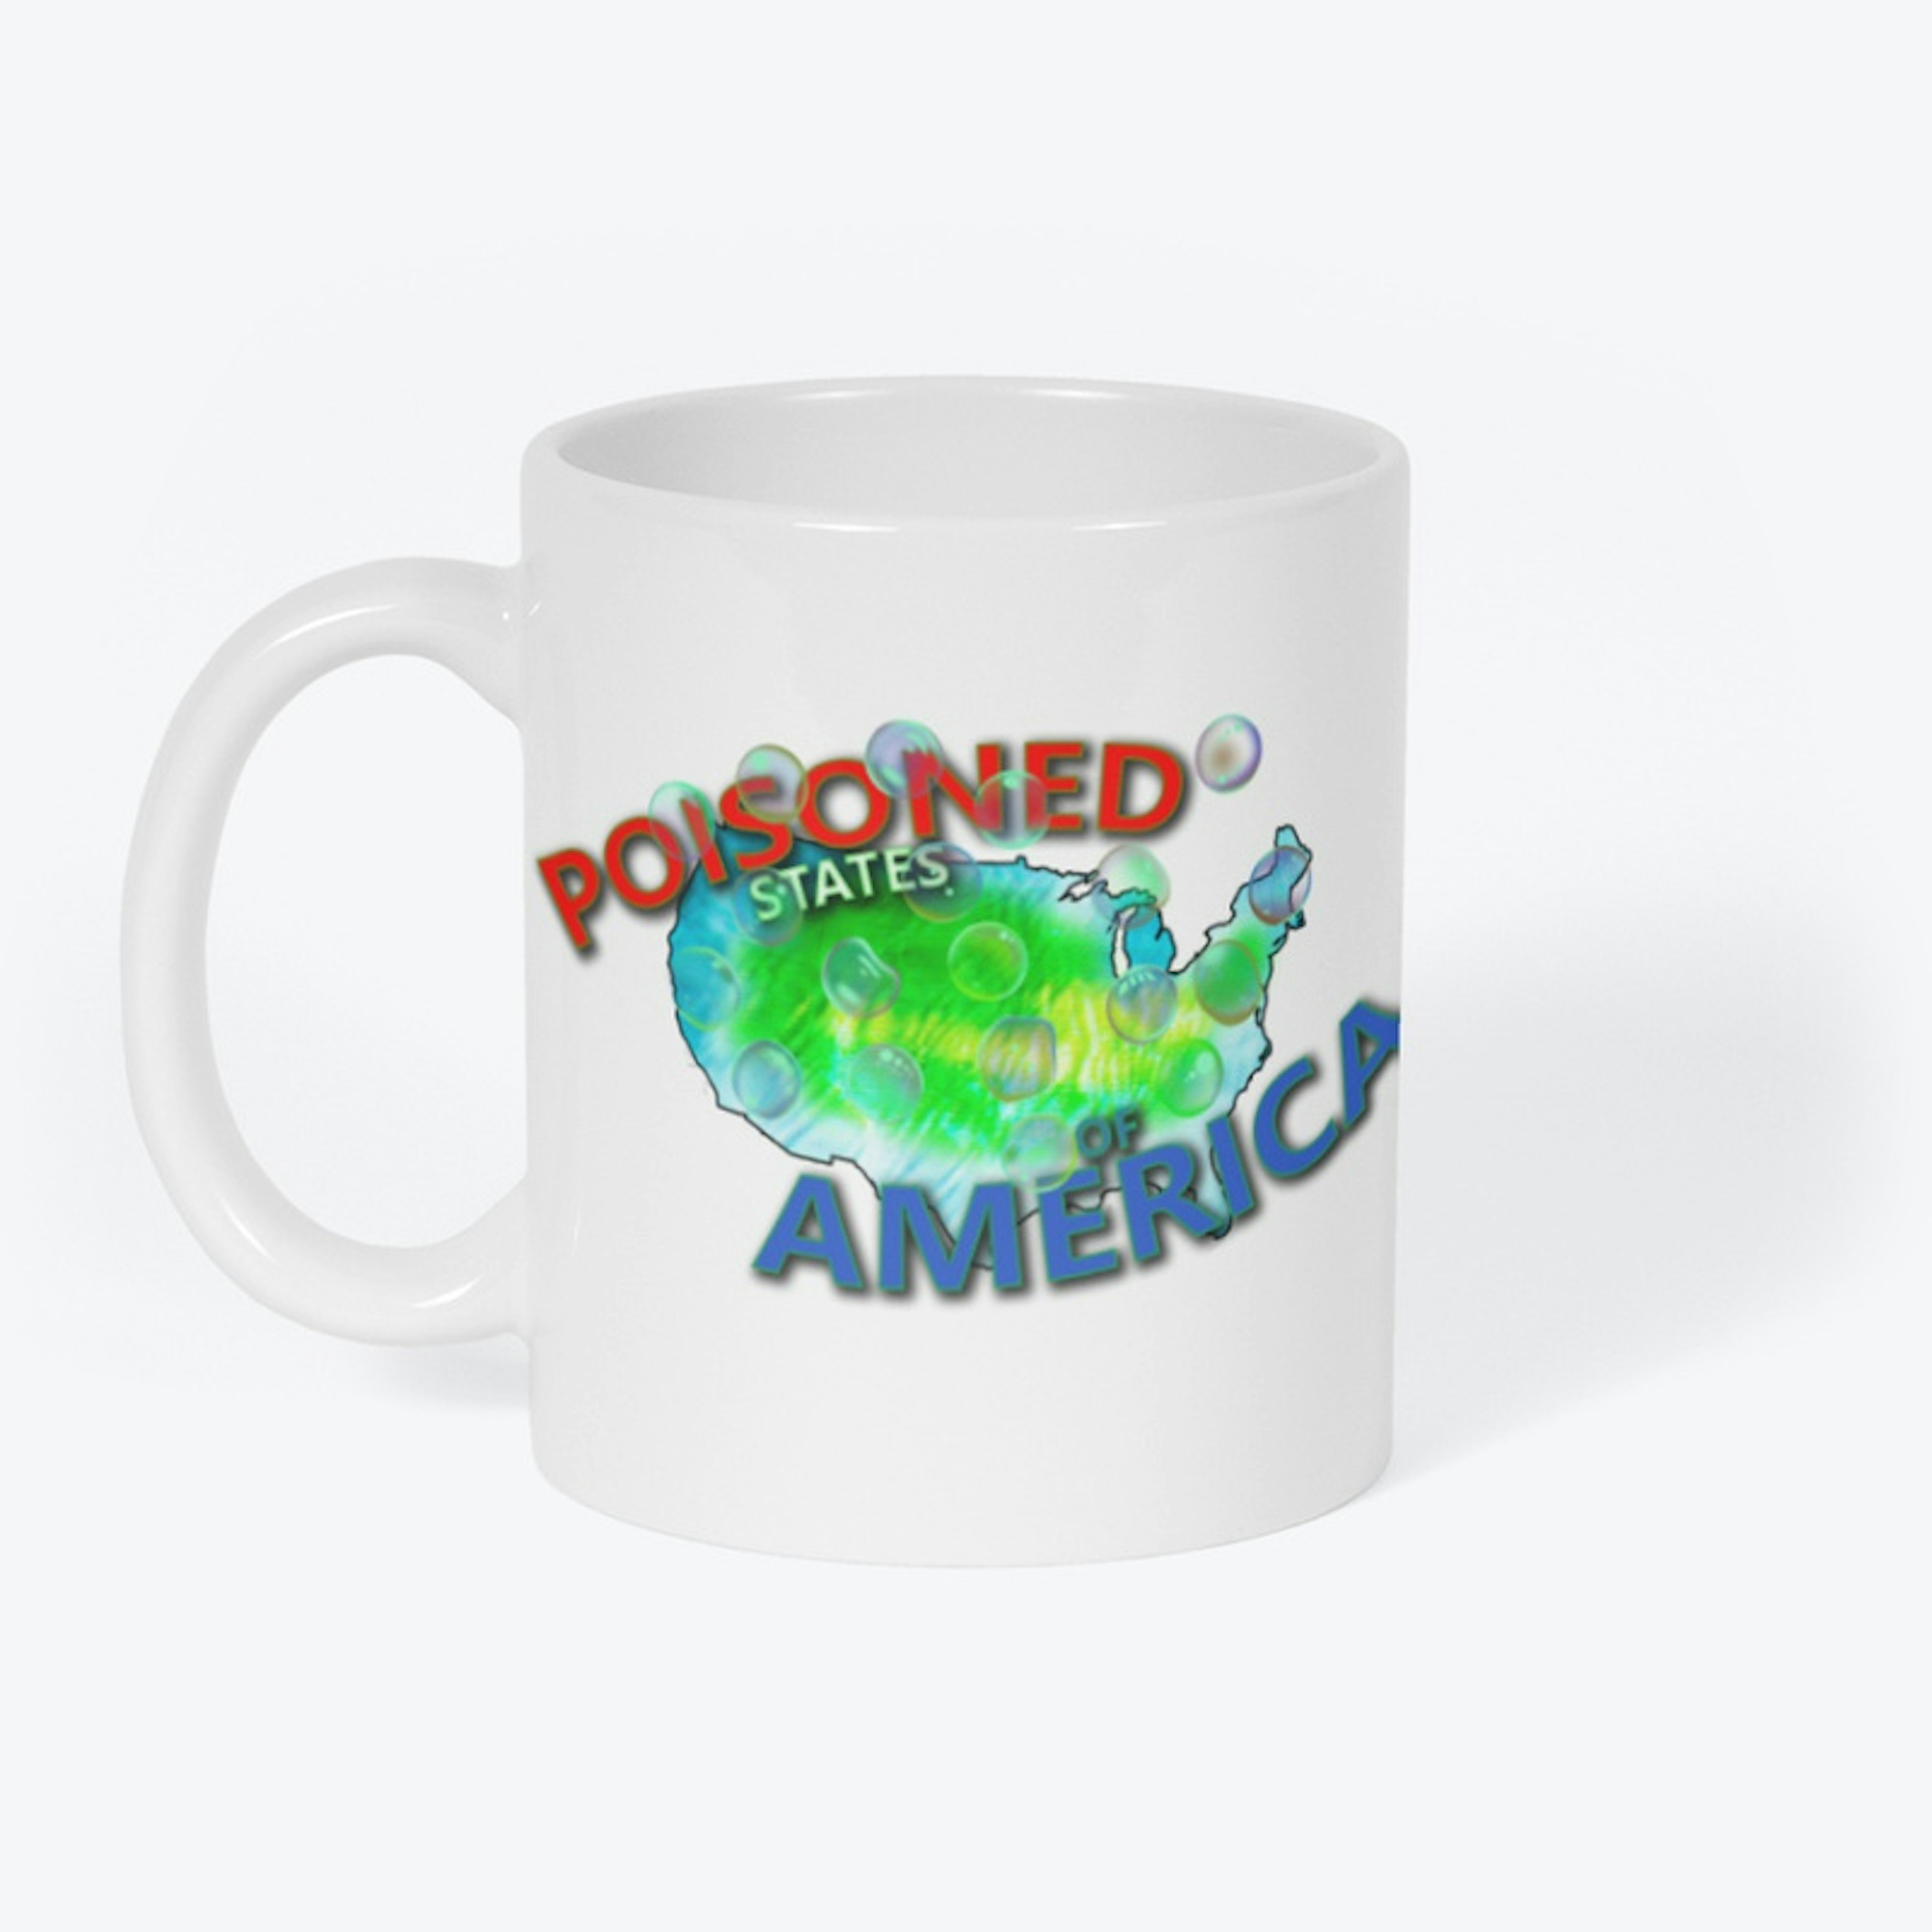 Poisoned States of America